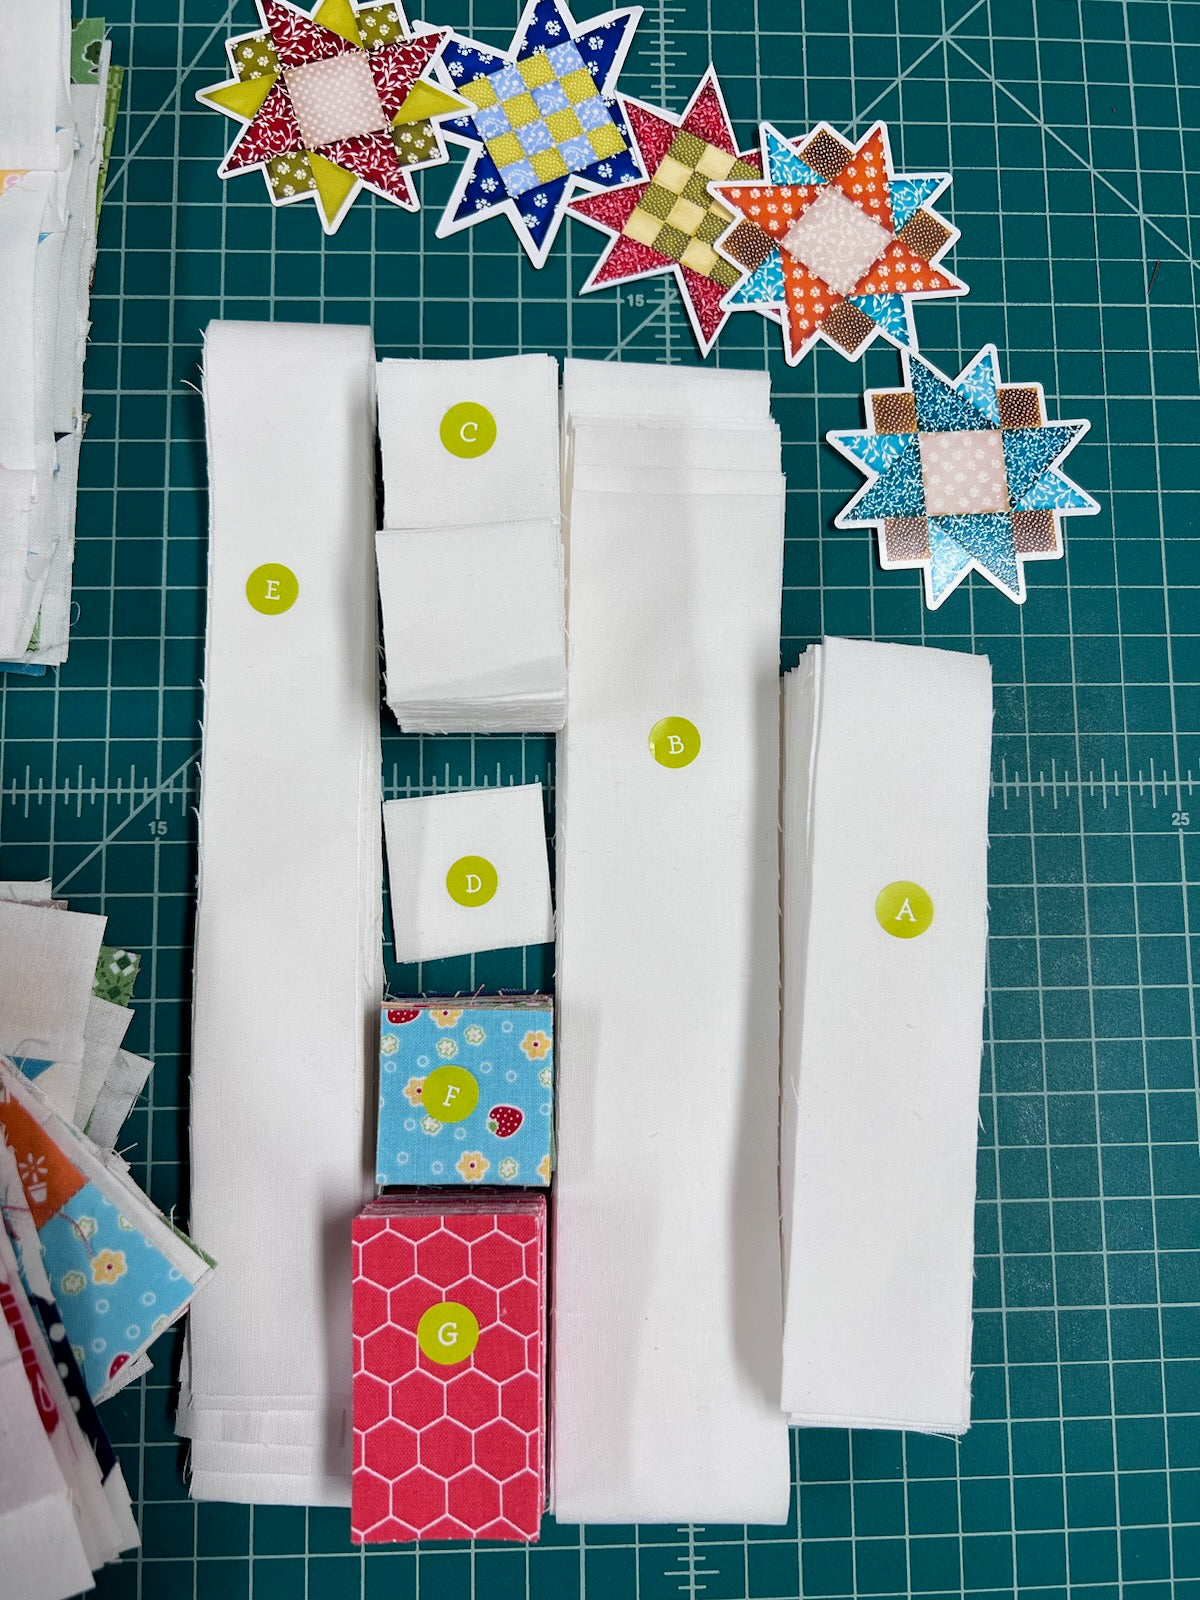 Green letter stickers for quilt sewing pieces on fabric and quilt blocks